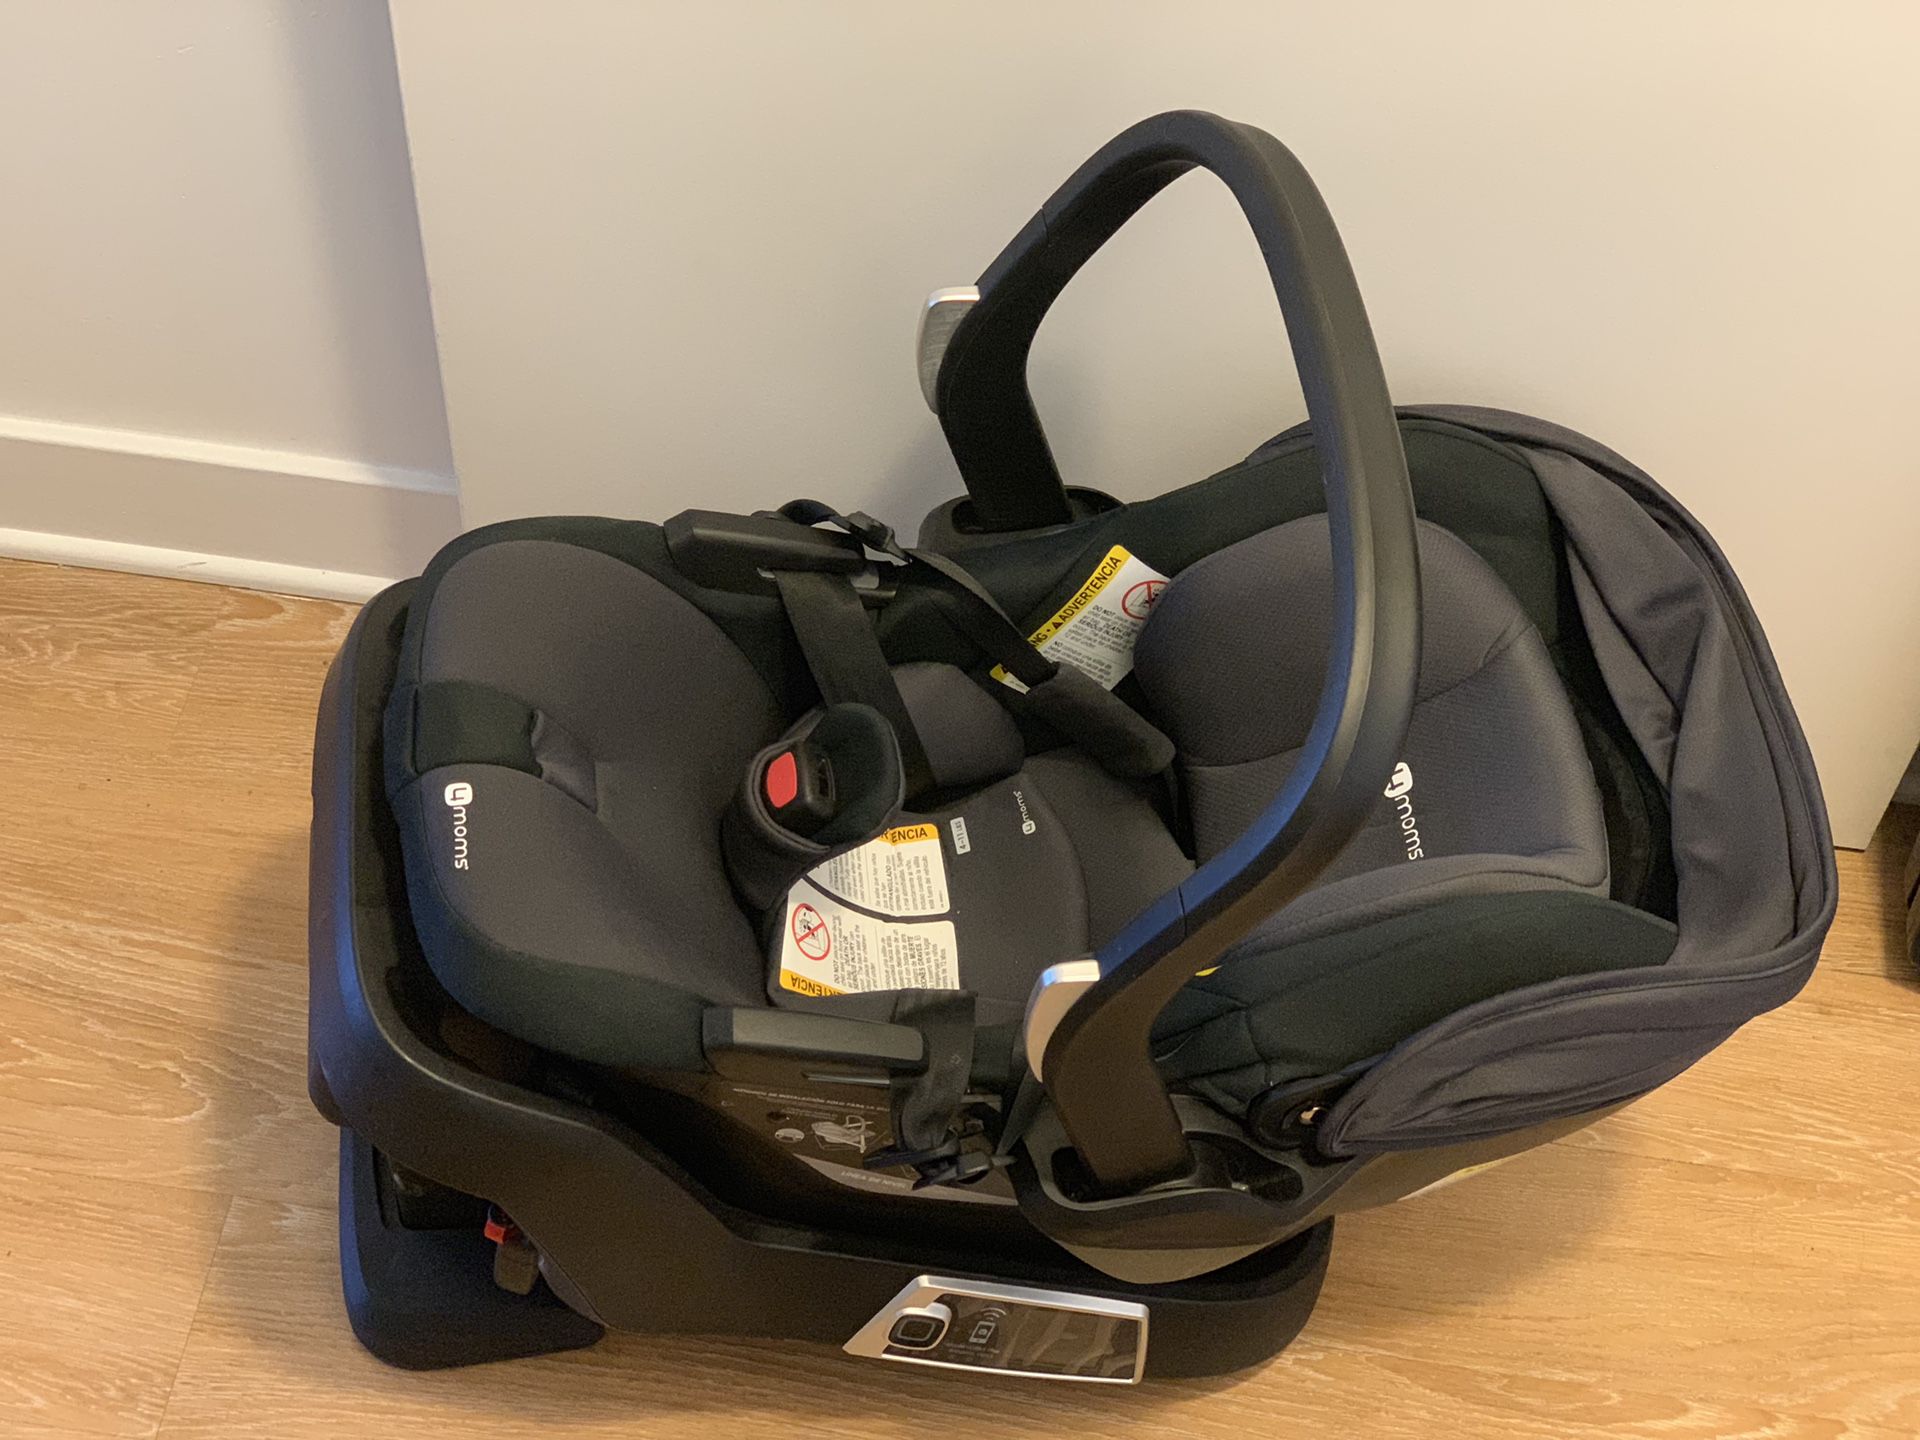 4moms infant car seat/self install base 0-12 months Pick up only located in NE DC area